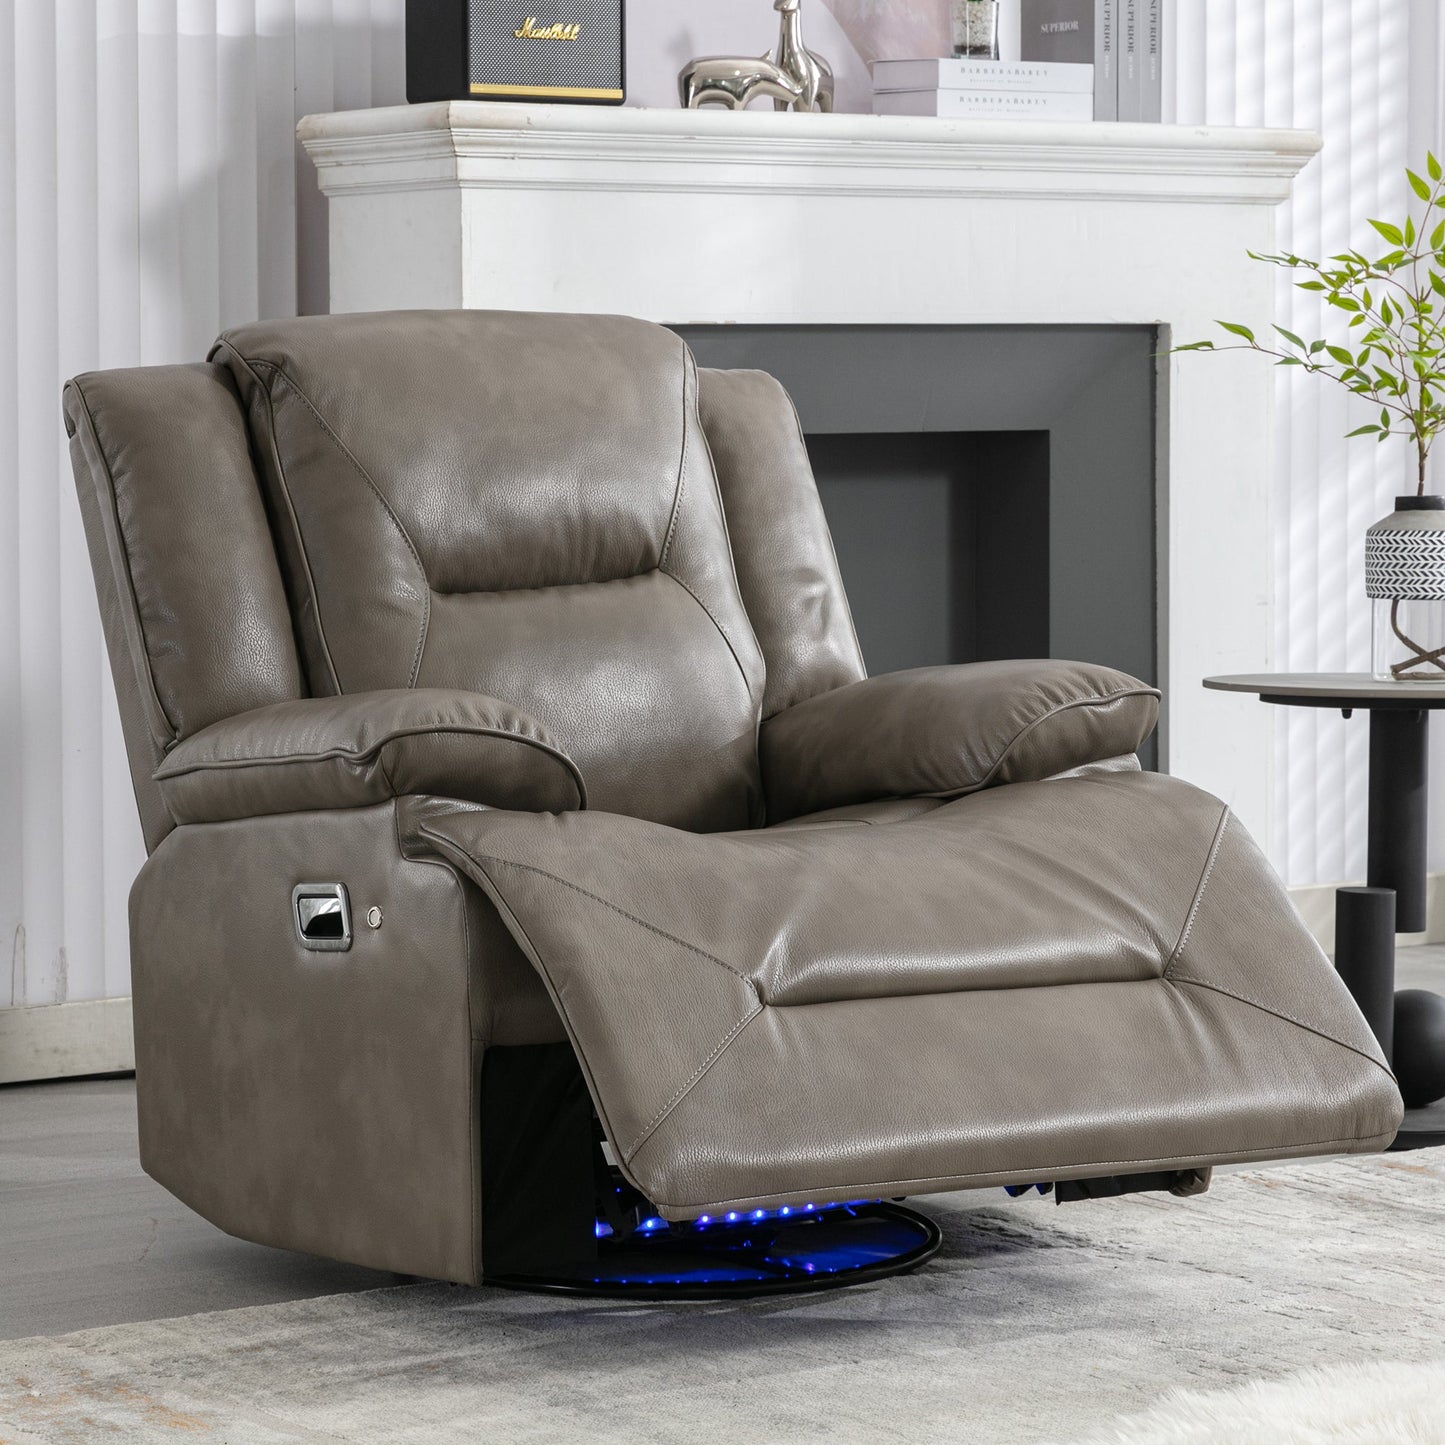 360° Swivel and Rocking Home Theater Recliner Manual Recliner Chair